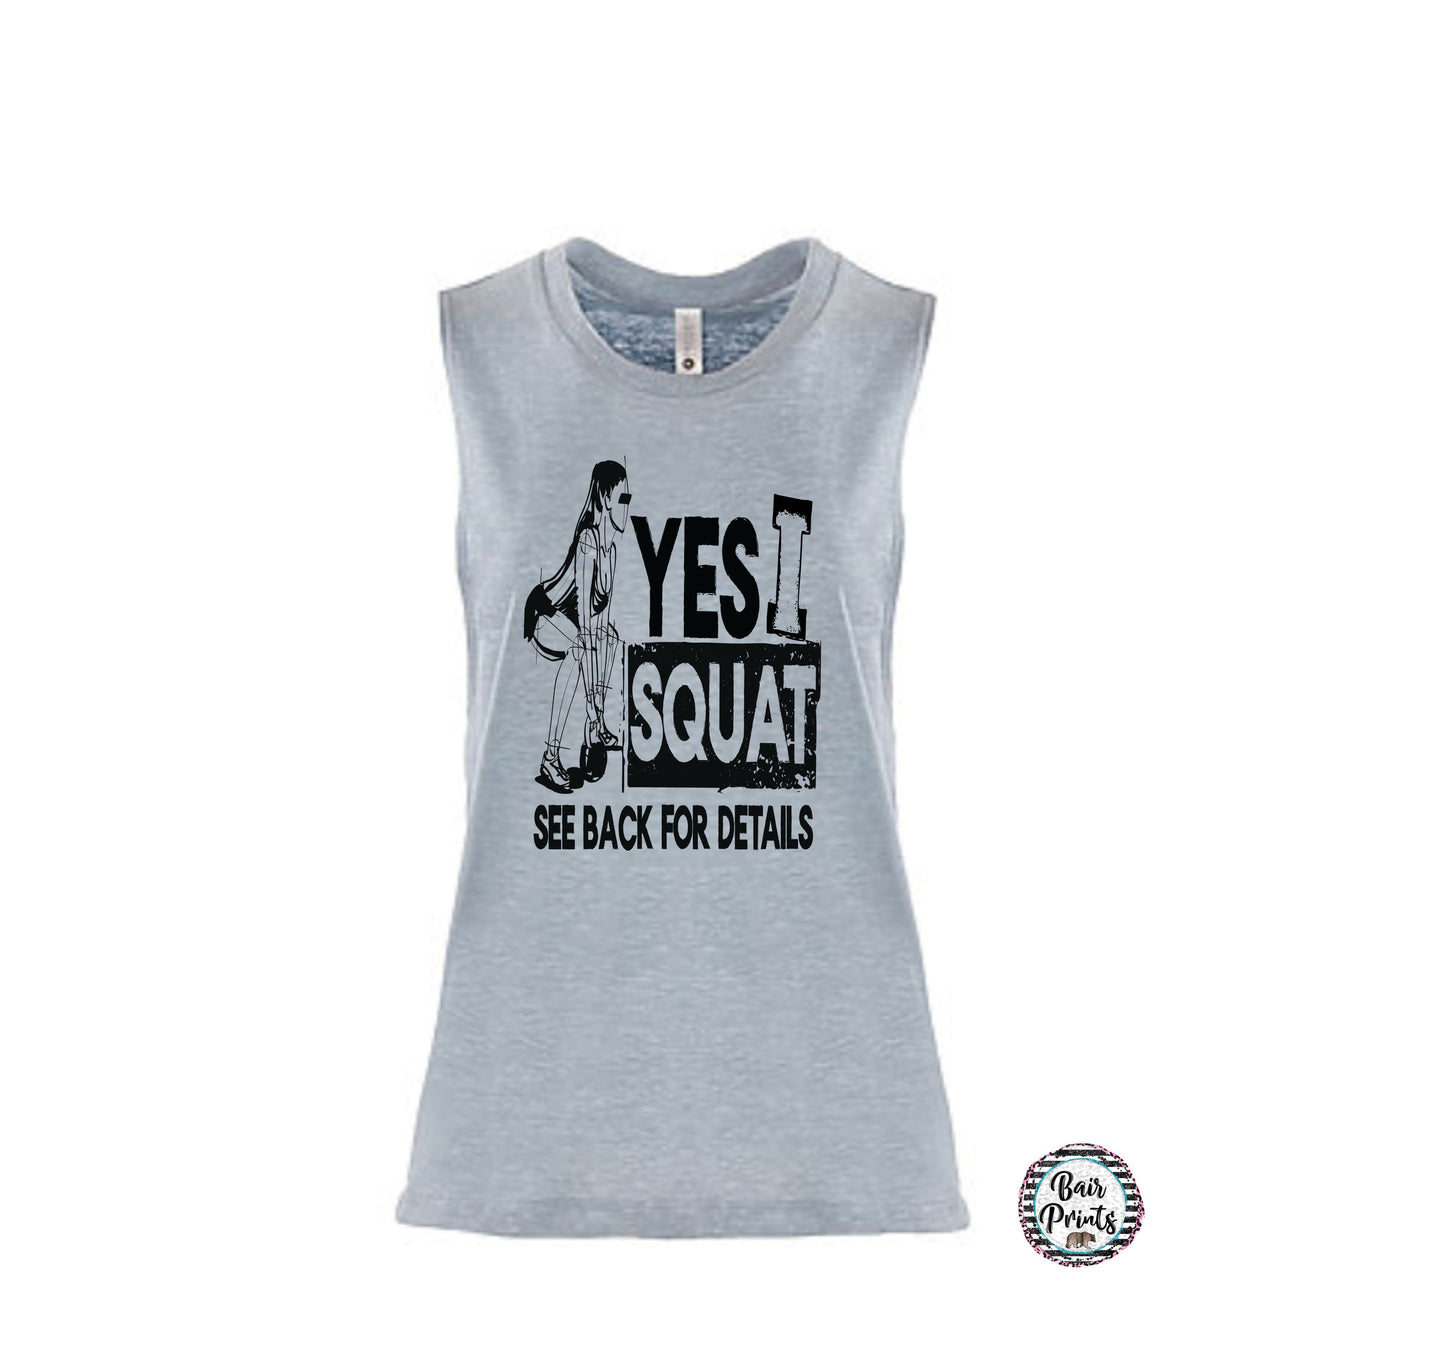 Yes I Squat See Back For Details/Ladies Muscle Tank Top